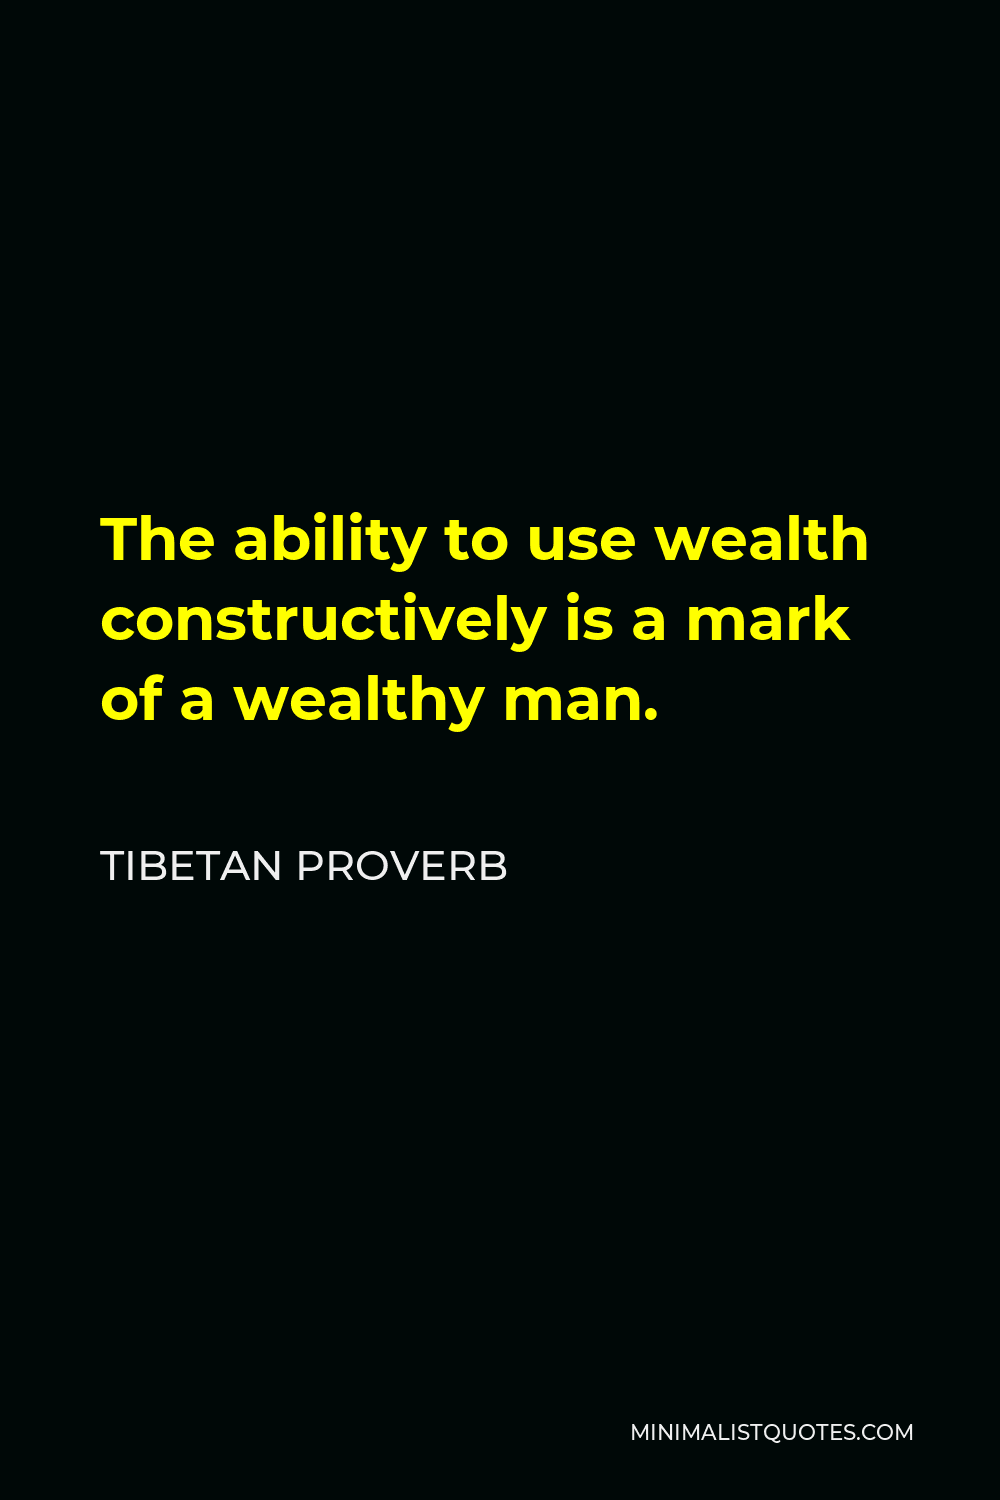 Tibetan Proverb Quote - The ability to use wealth constructively is a mark of a wealthy man.